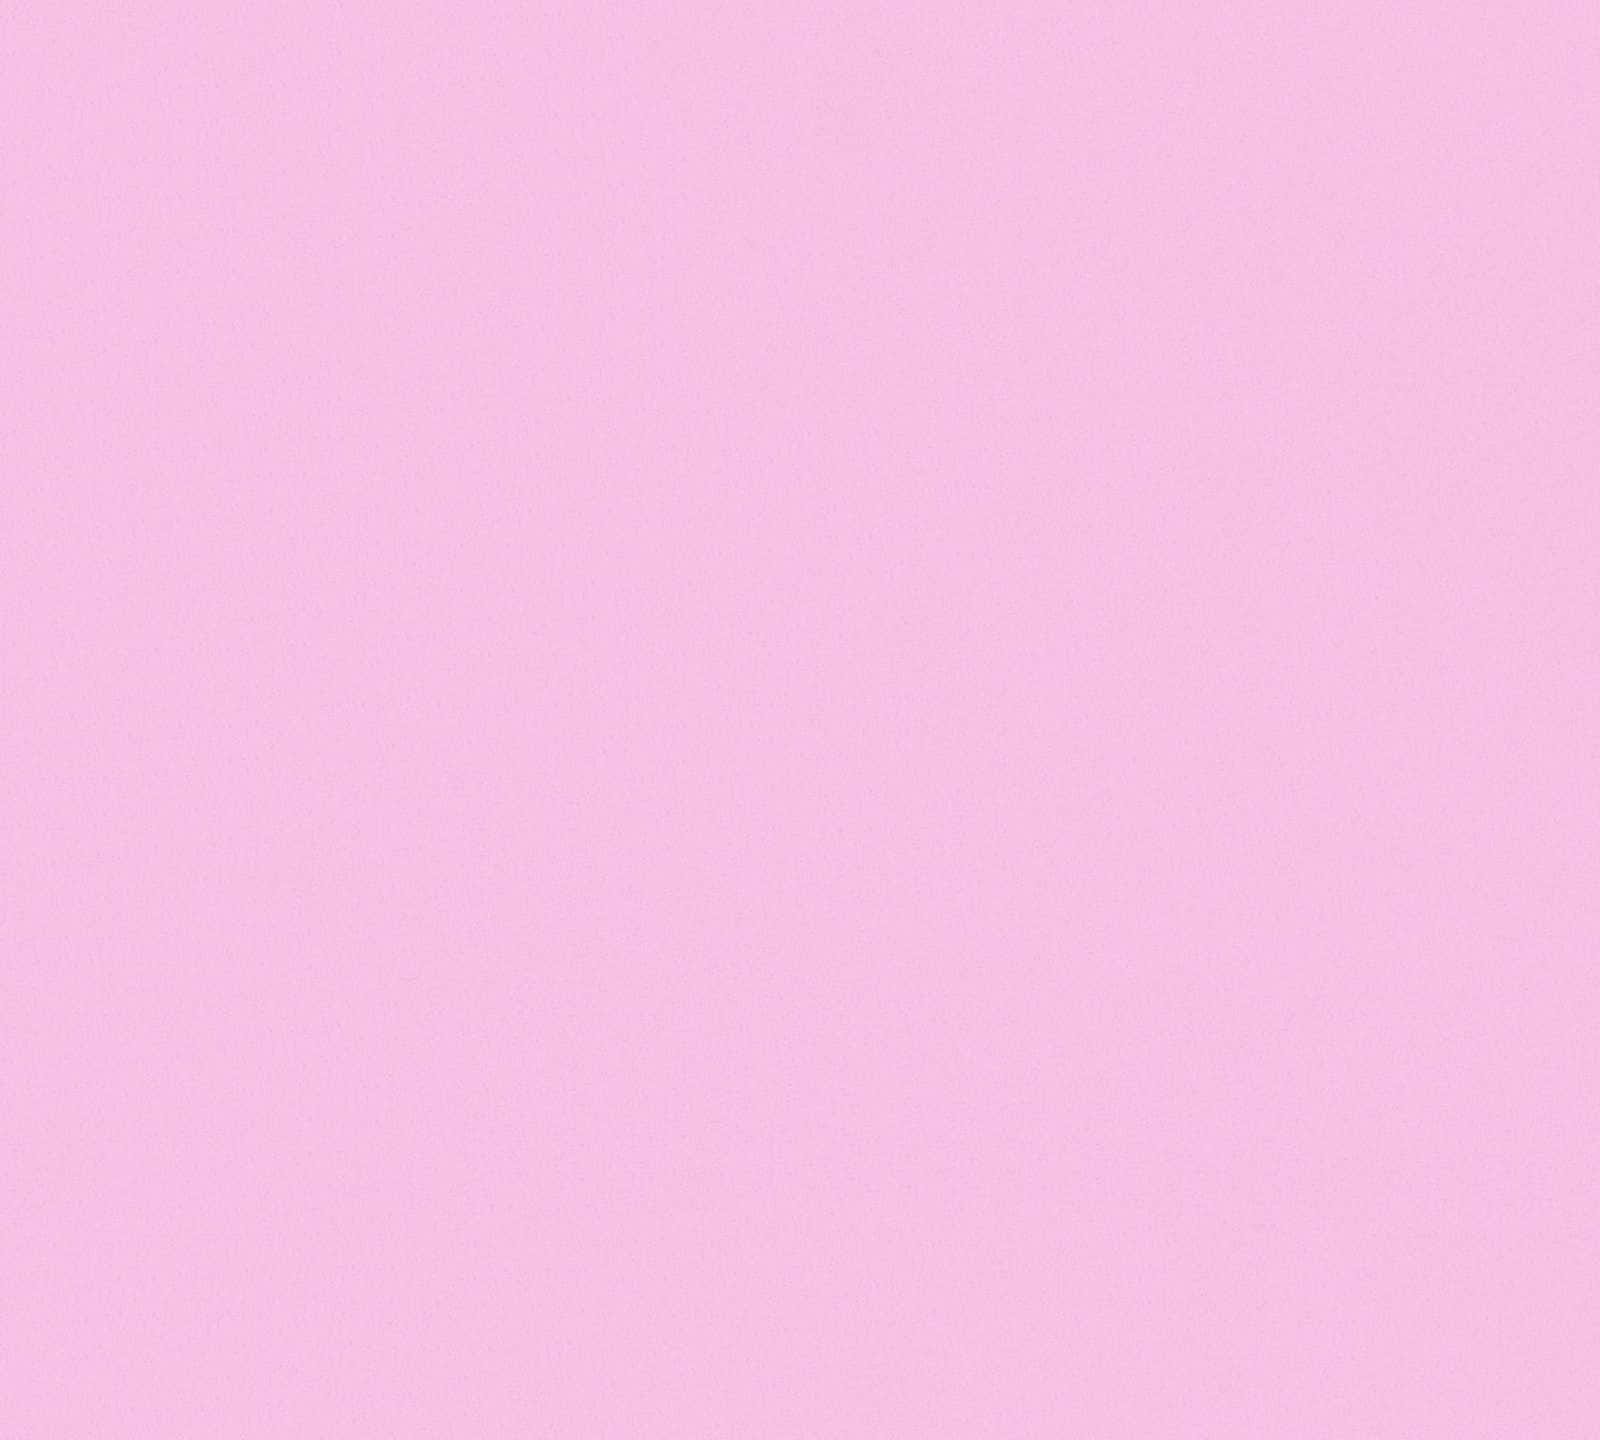 Girly Pink Background Background Pink White Stripes Background Image And  Wallpaper for Free Download  Pink wallpaper iphone Pink background Ombre  wallpapers